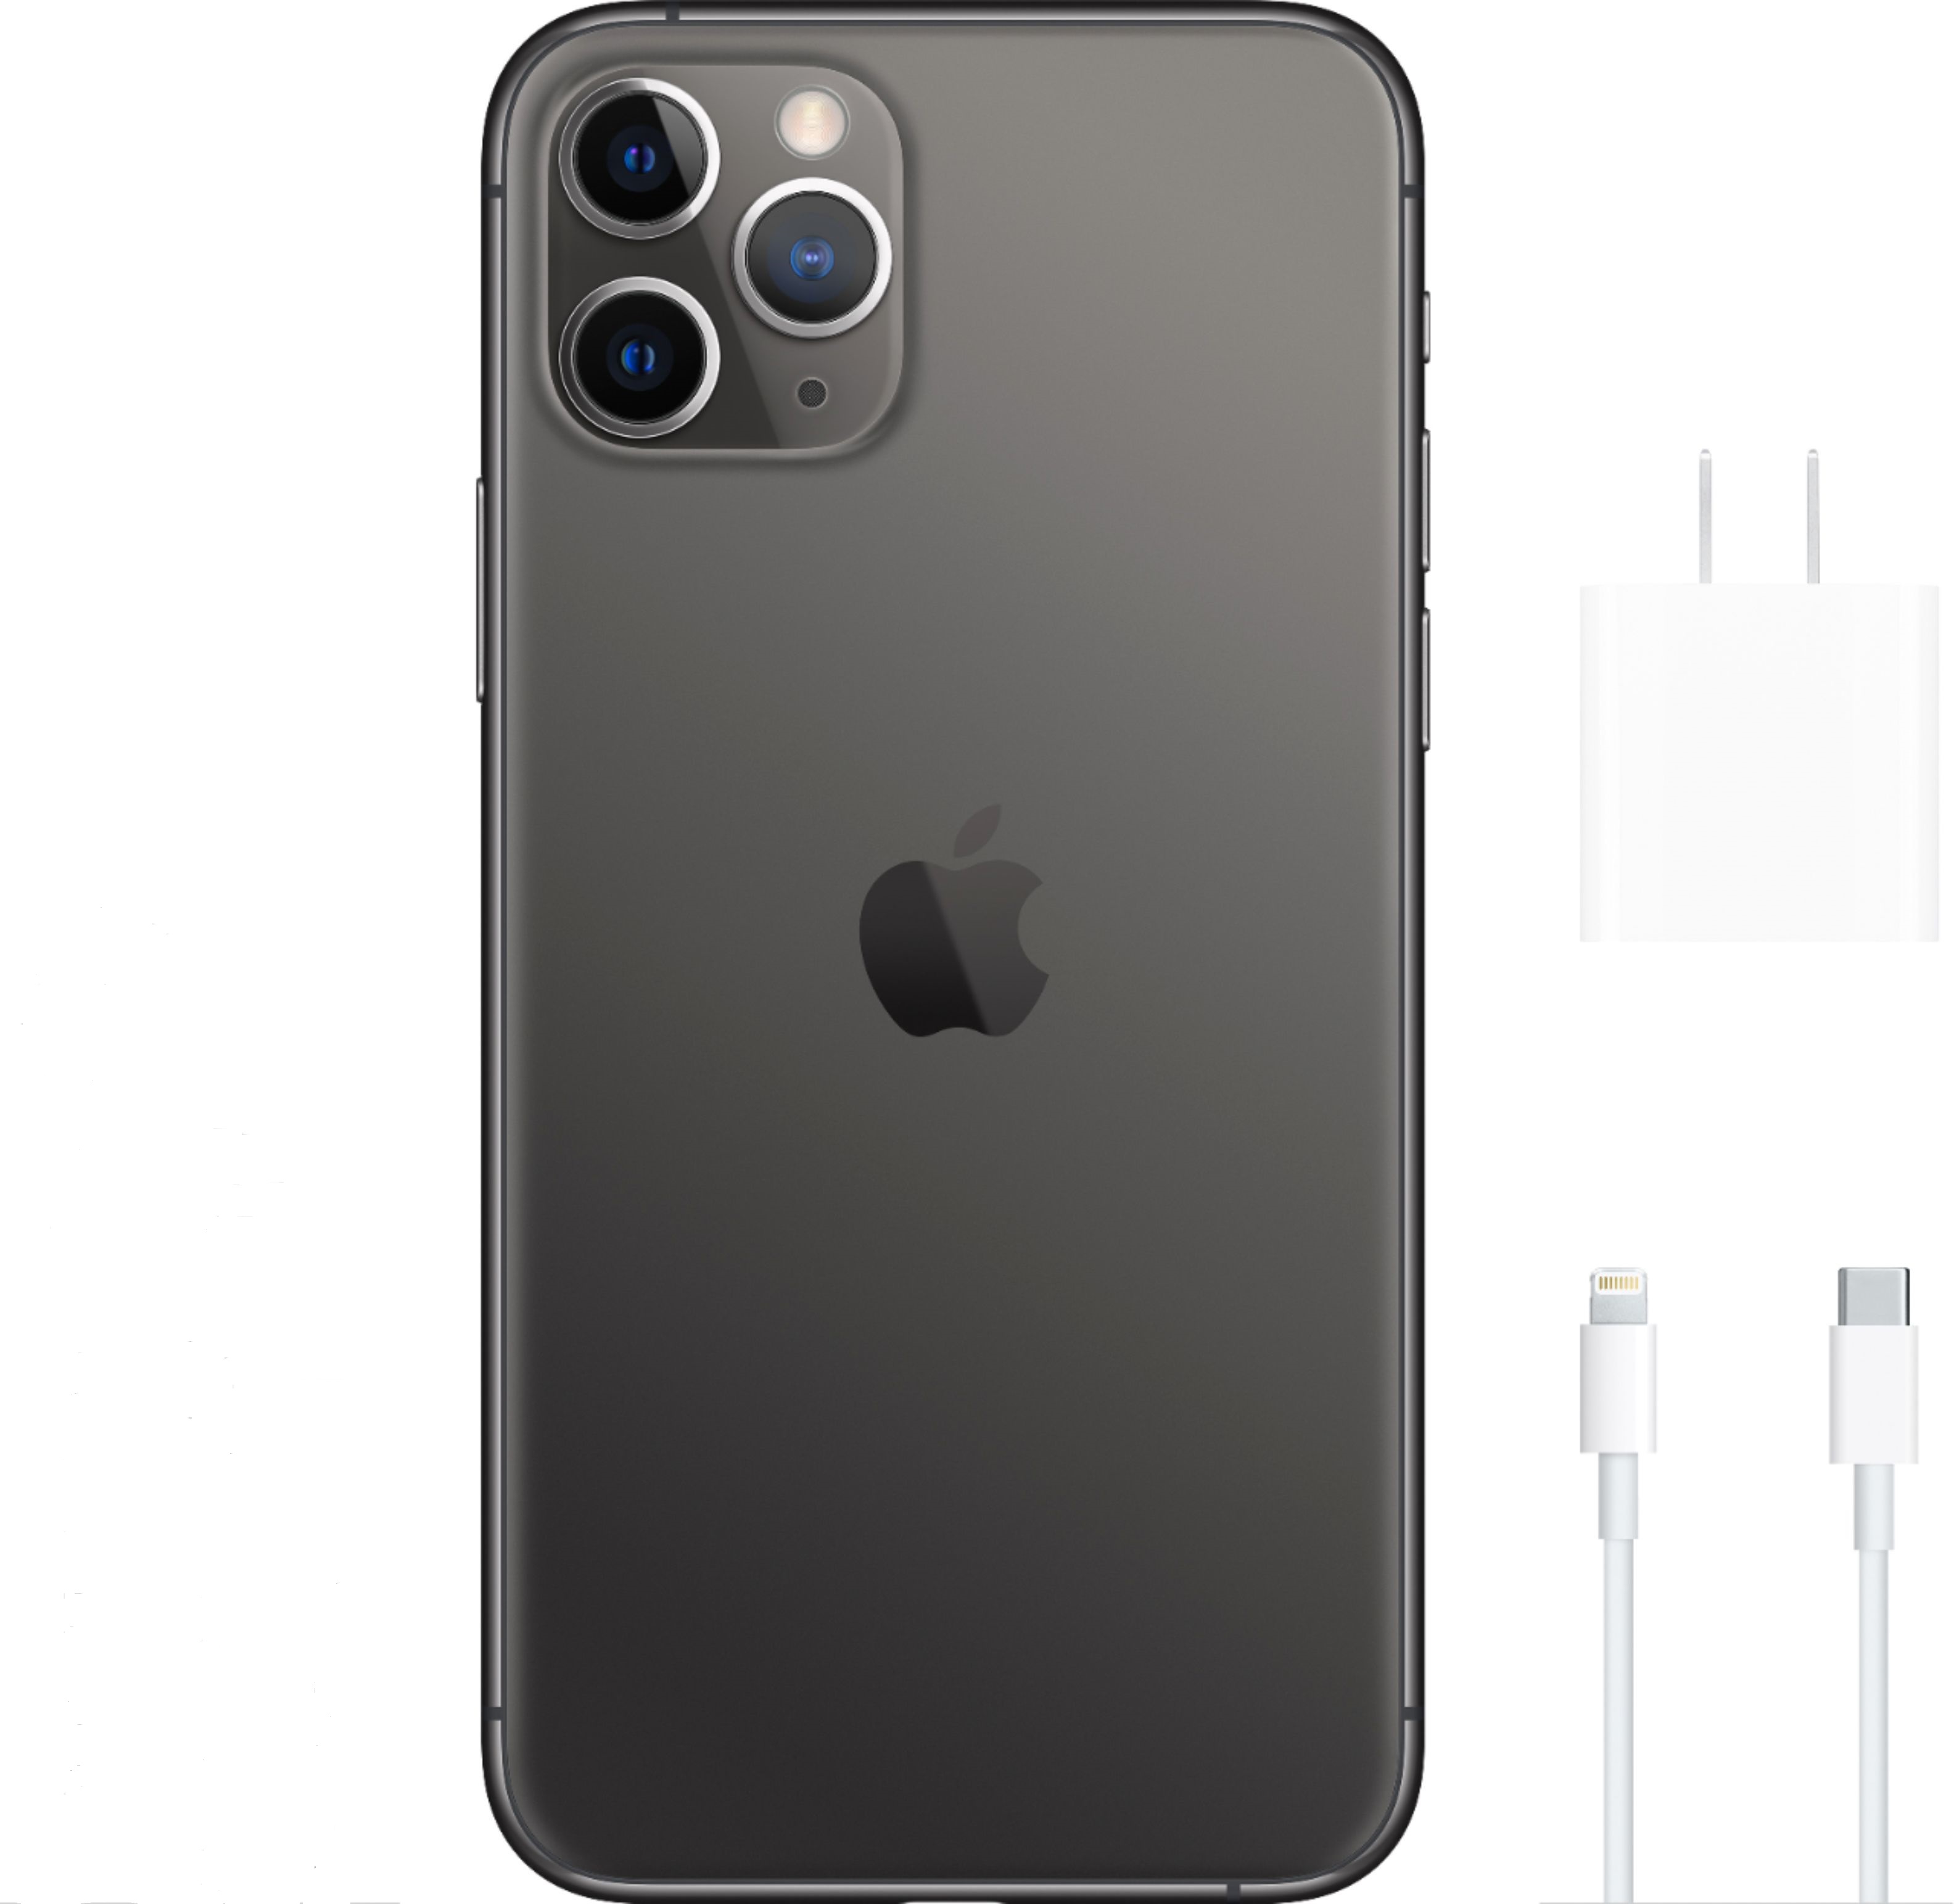 Restored Like New Apple iPhone 11 Pro Max 64GB Factory Unlocked 4G LTE Smartphone (Refurbished) - image 2 of 5